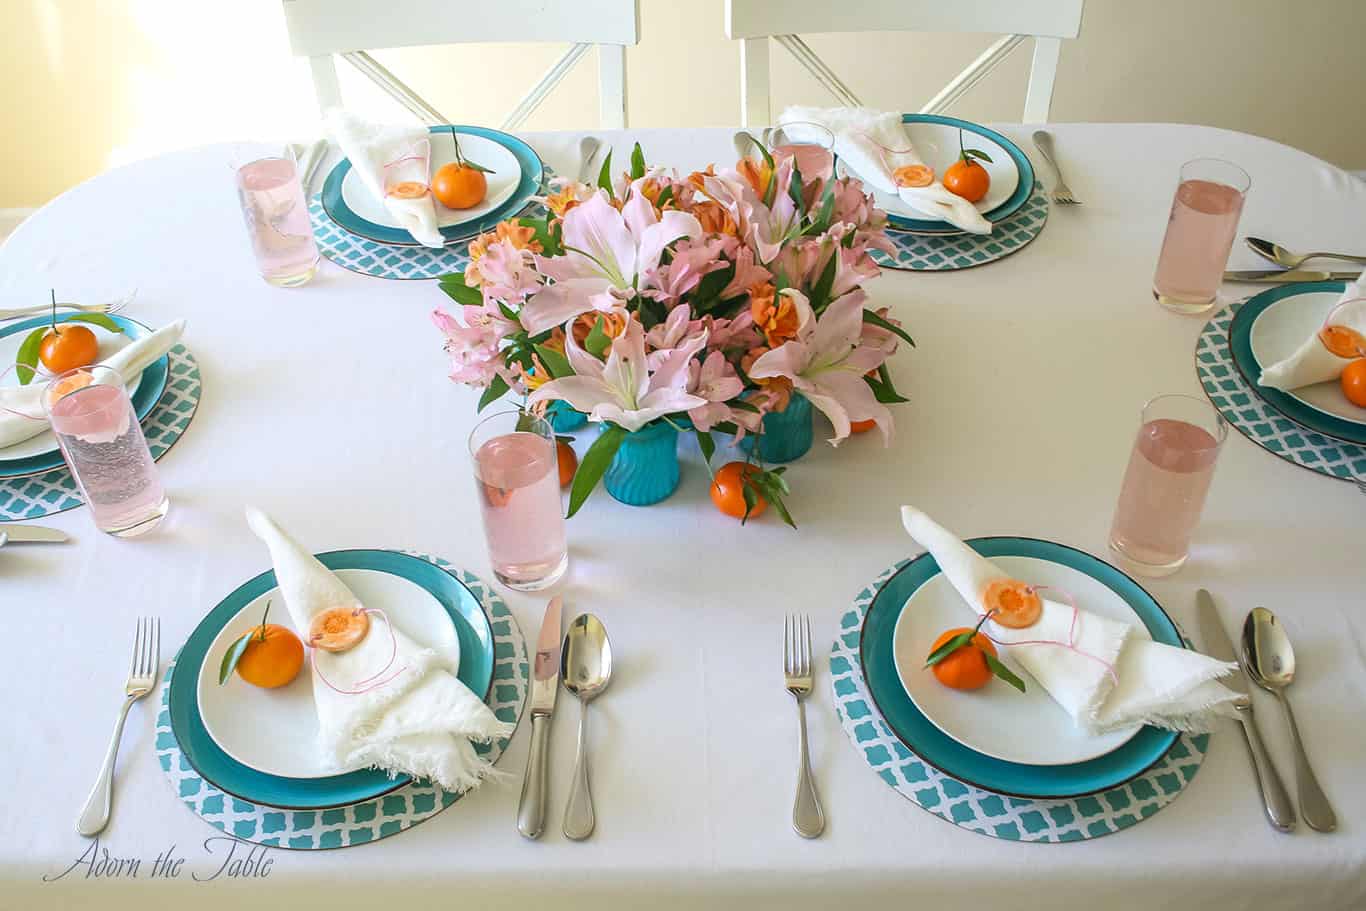 Centerpieces three ways - table setting view from above with 6 teal diy vases in the middle